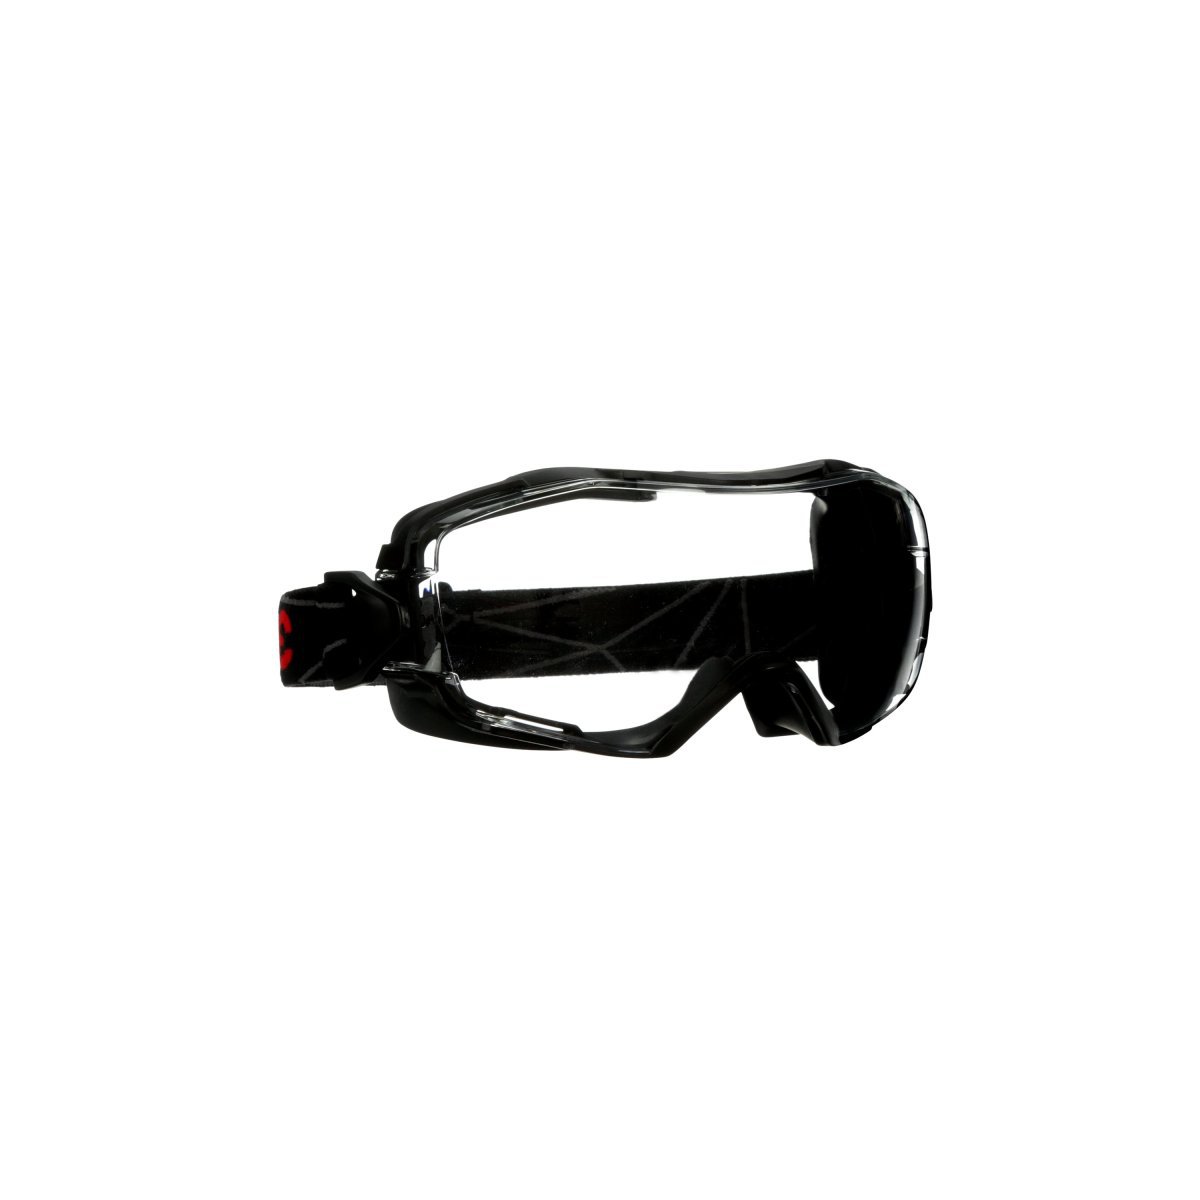 3M™ GoggleGear™ Indirect Vent Droplet/Splash/Dust Goggles With Black Frame And Clear Scotchgard™ Anti-Fog Lens (Availability res